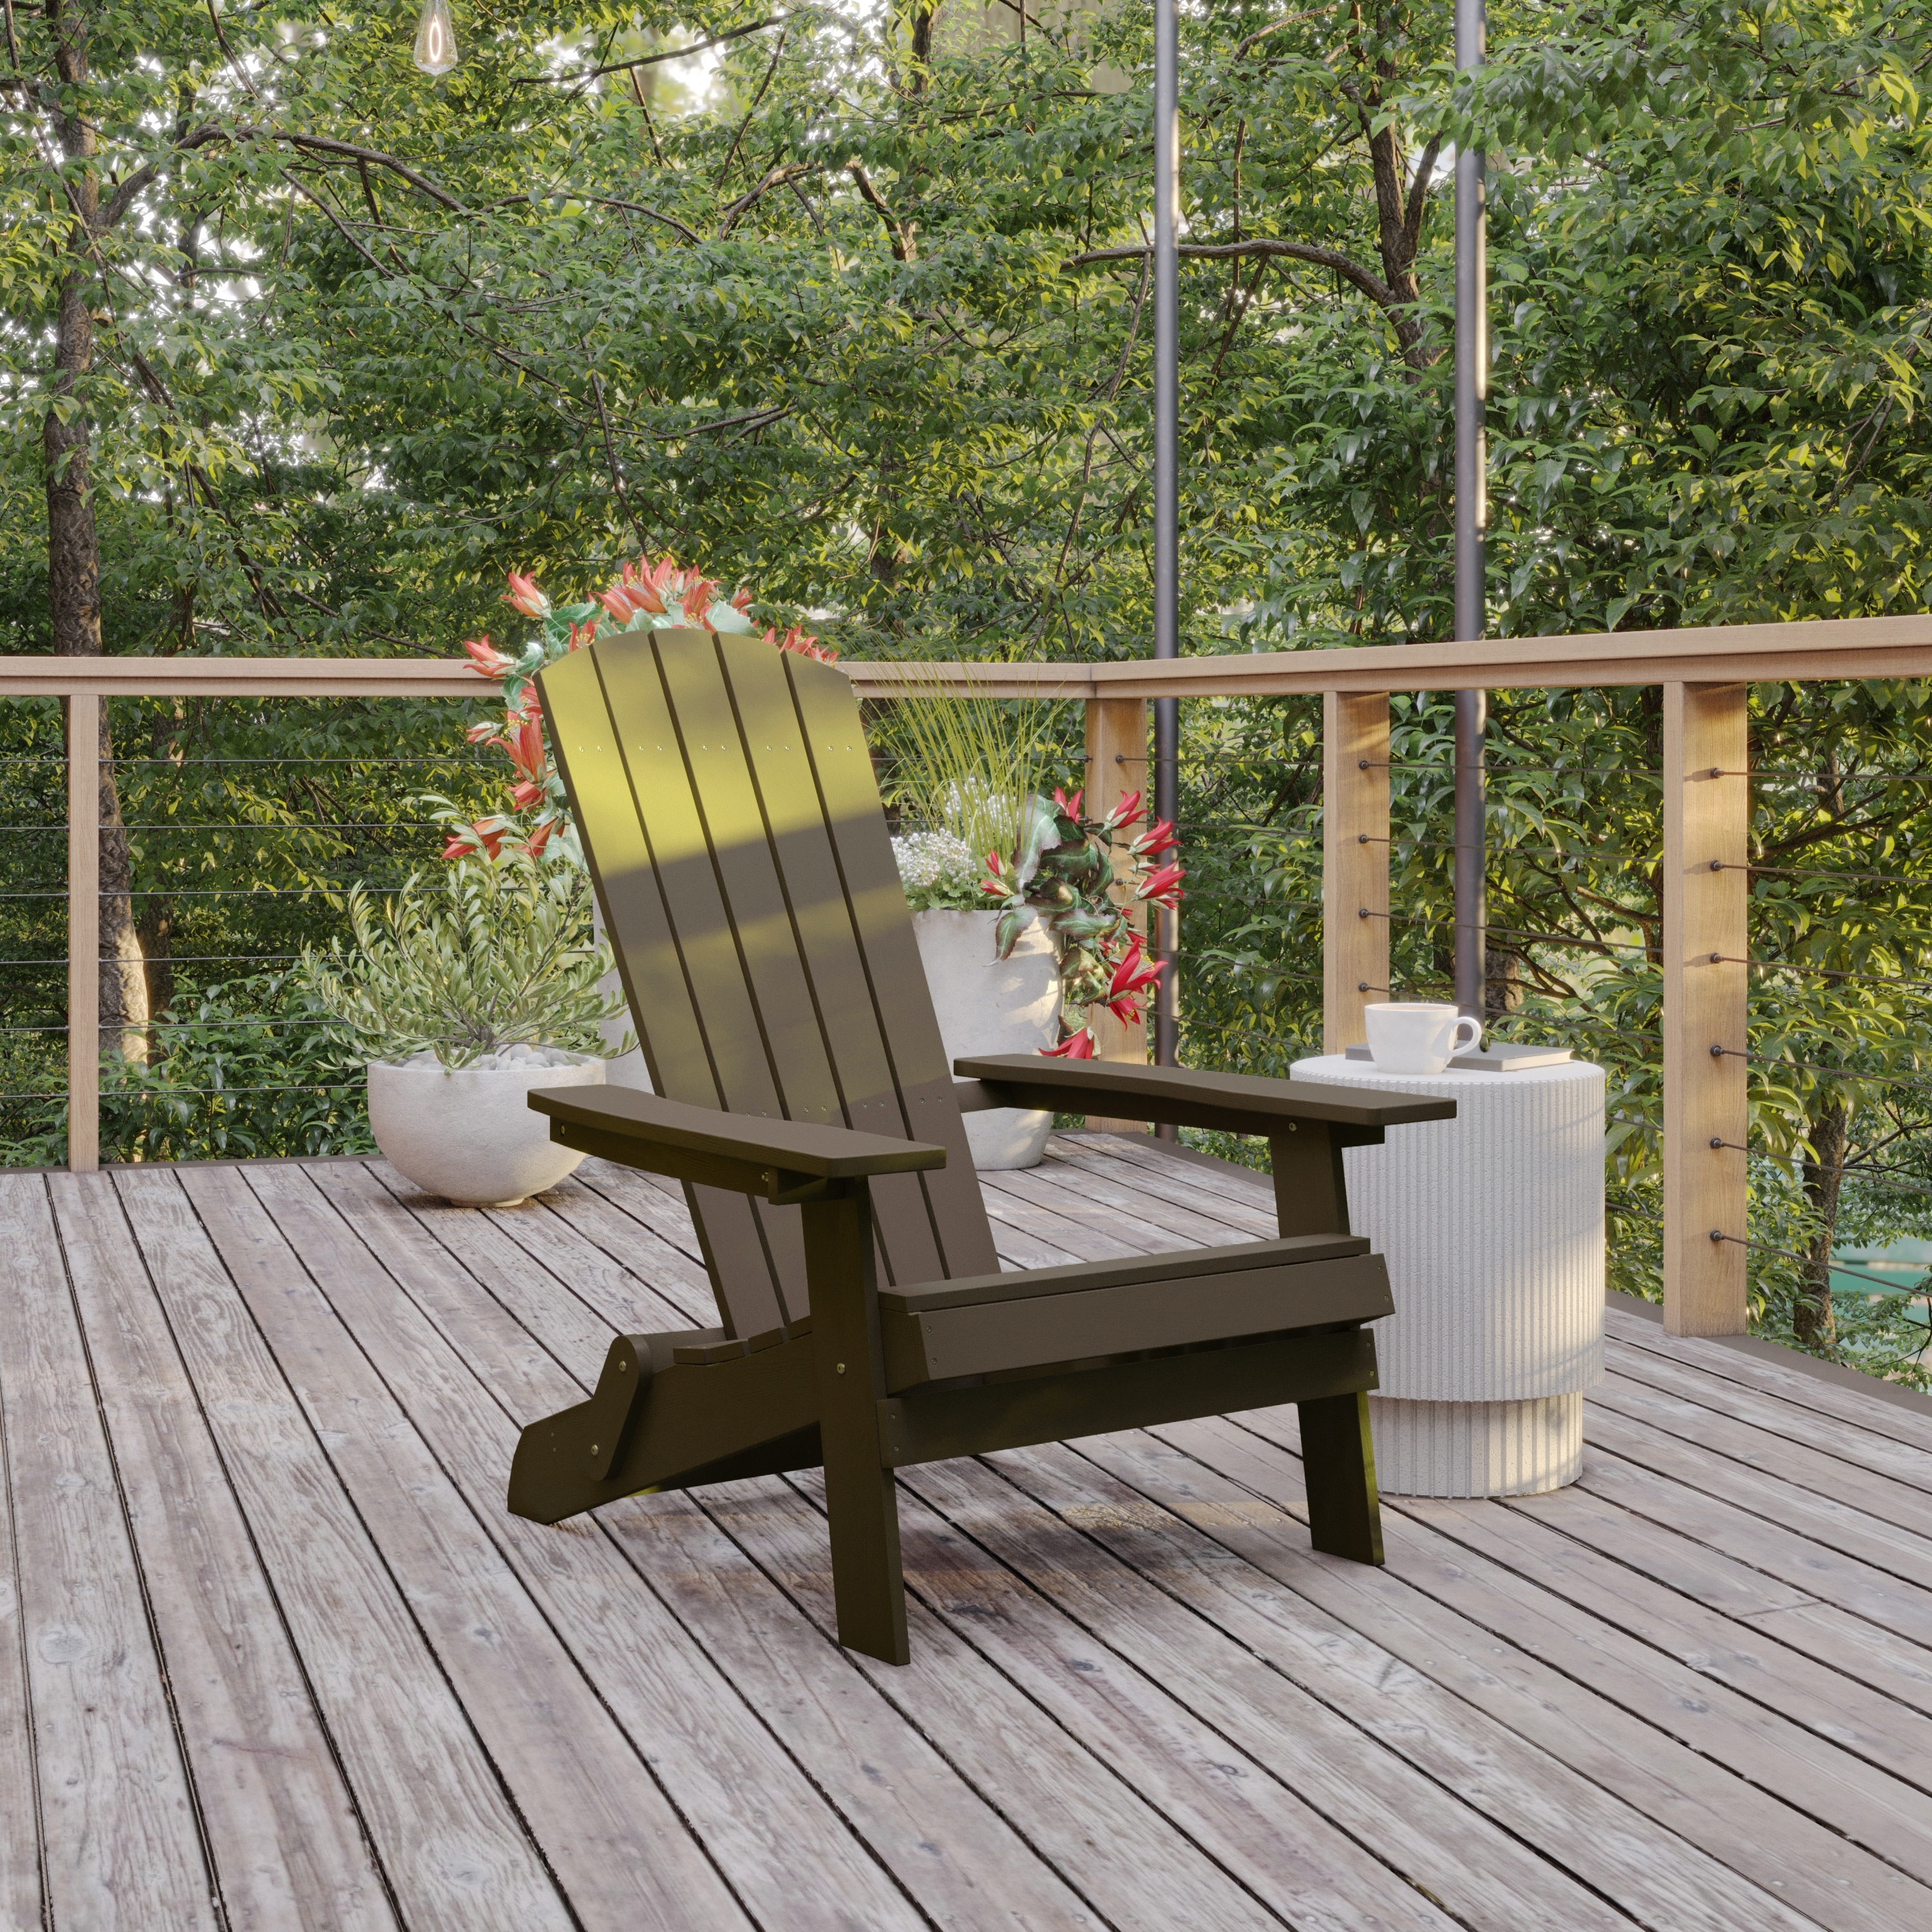 All-weather Poly Resin Folding Adirondack Chair - Patio Chair